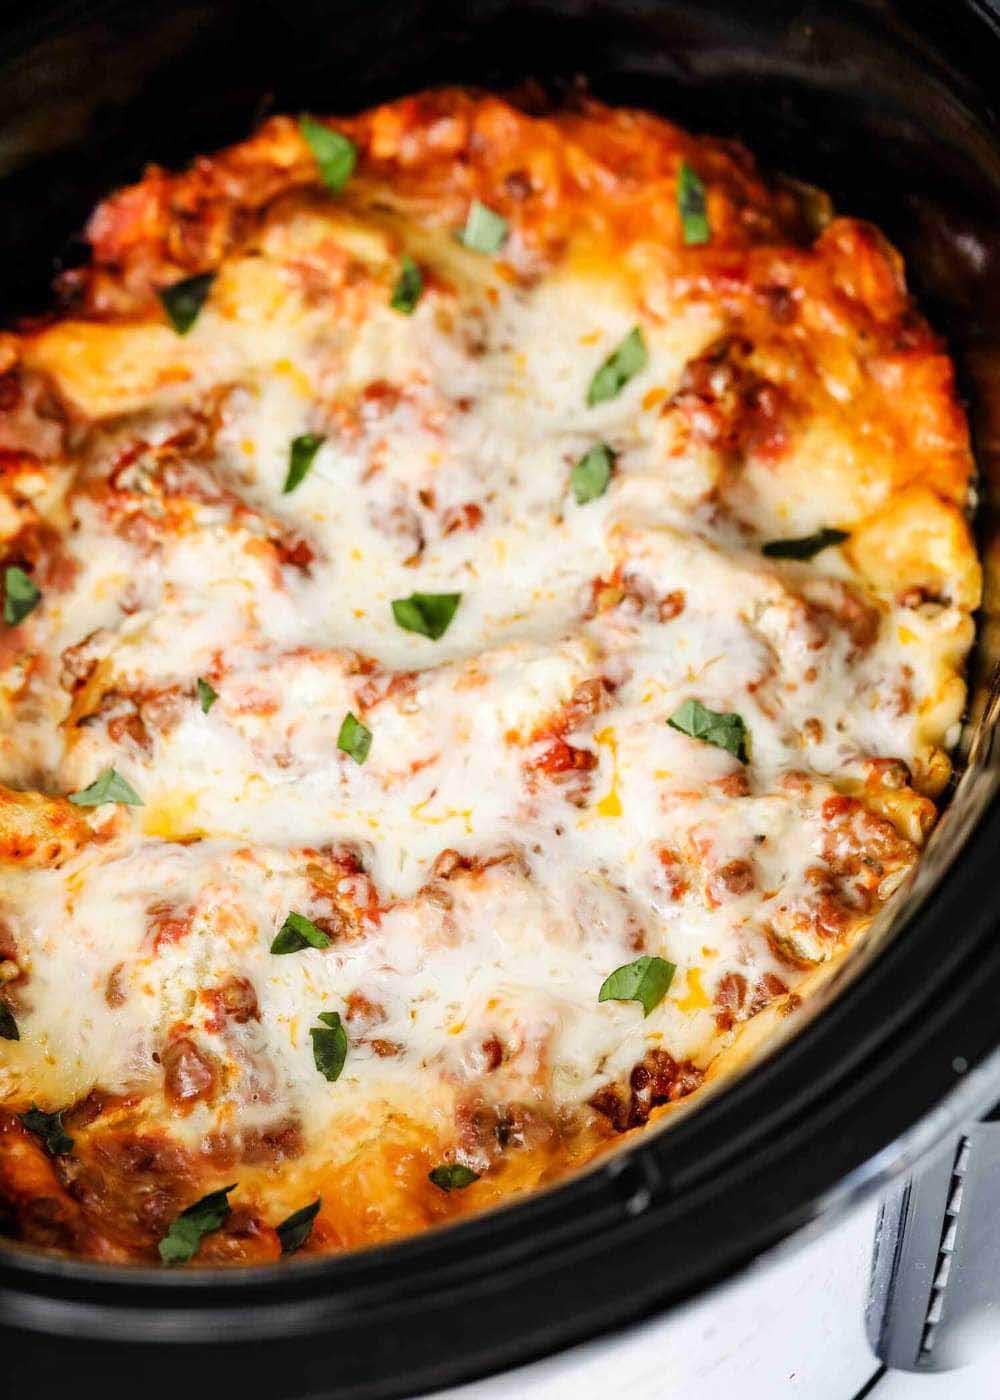 16 Delicious 'Dump Dinners' To Make In The Slow Cooker - Homemaking.com